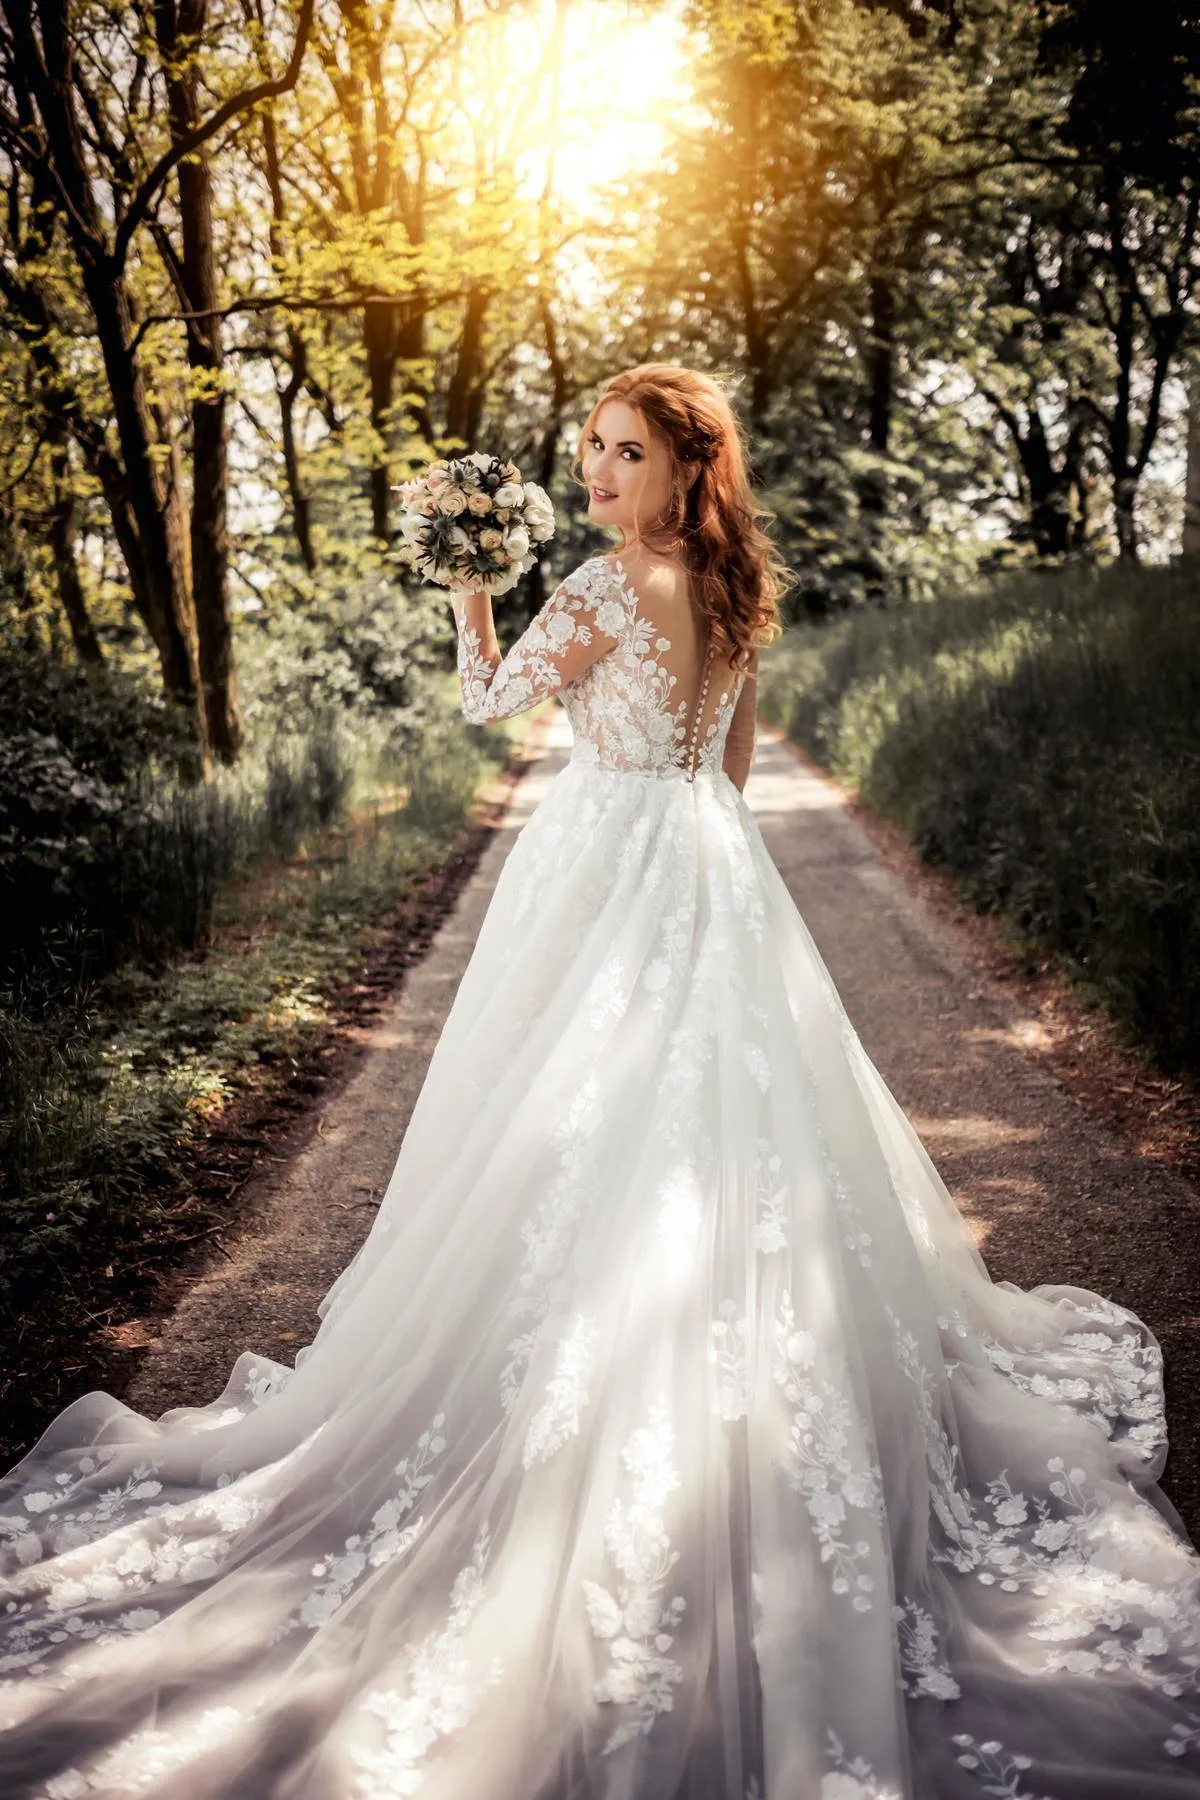 Bride walks through the forest and looks back at the camera 